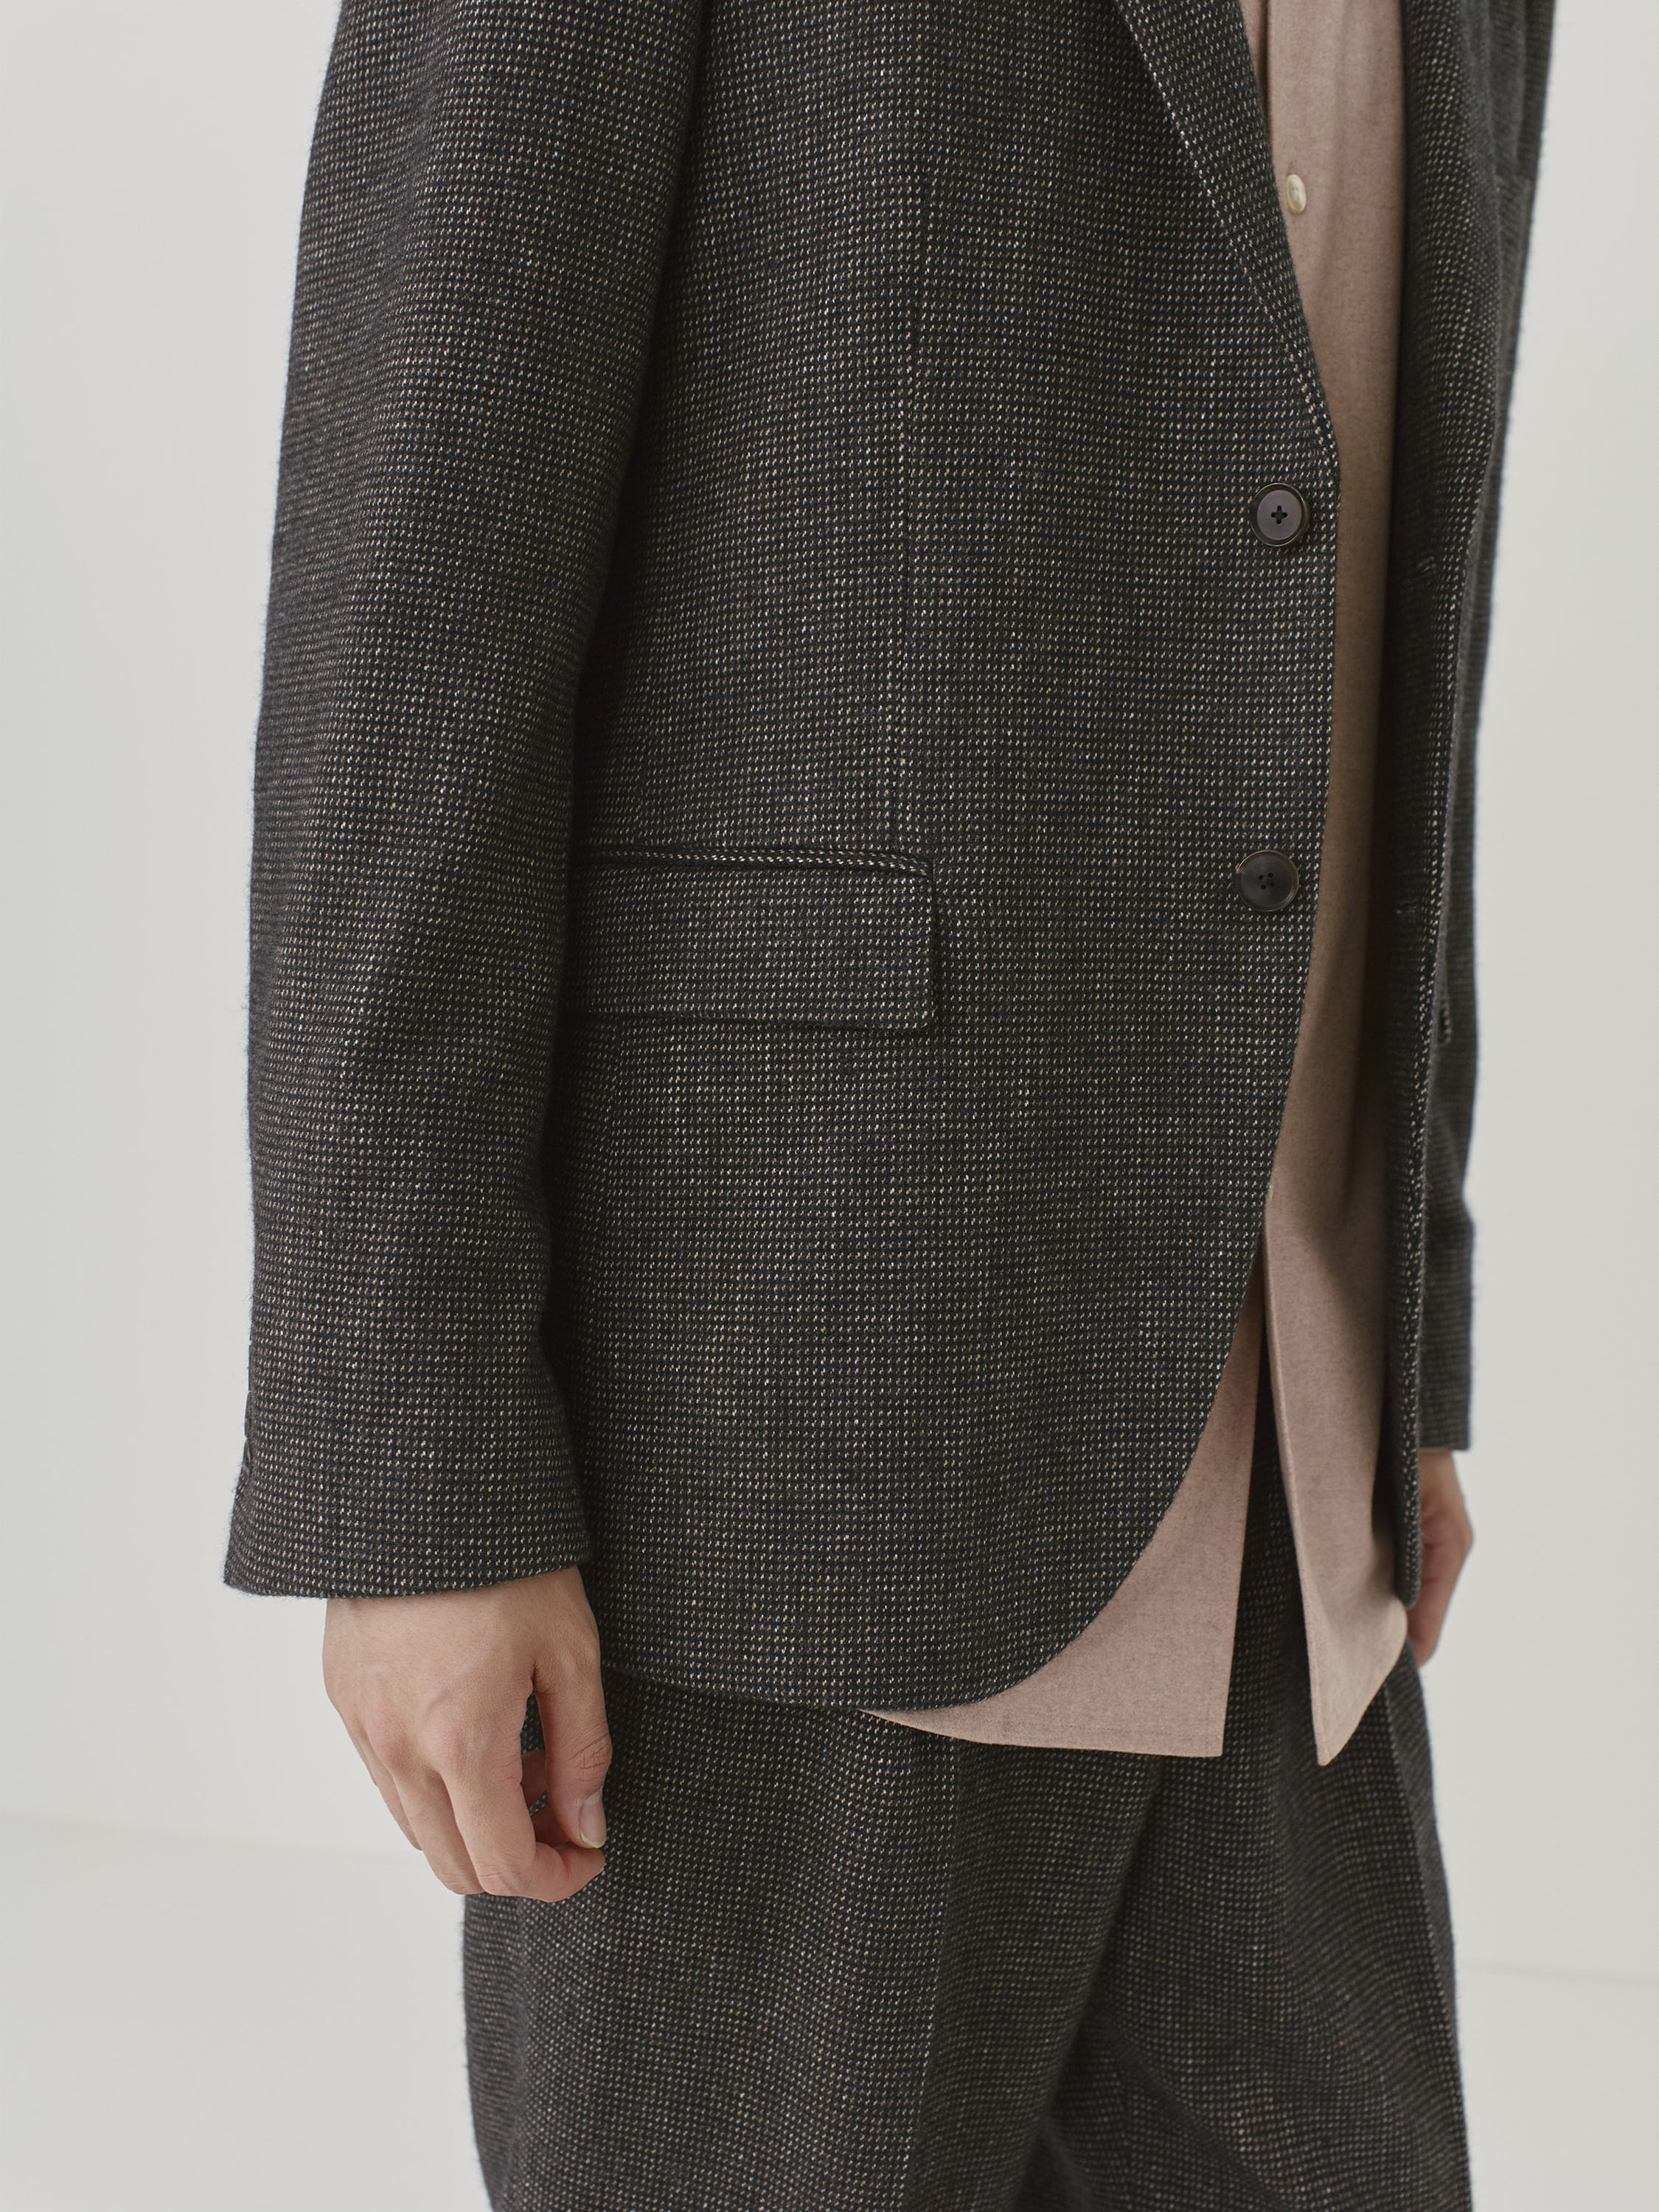 ORGANIC COTTON CASHMERE WOOL TWEED JACKET 詳細画像 TOP CHARCOAL 2